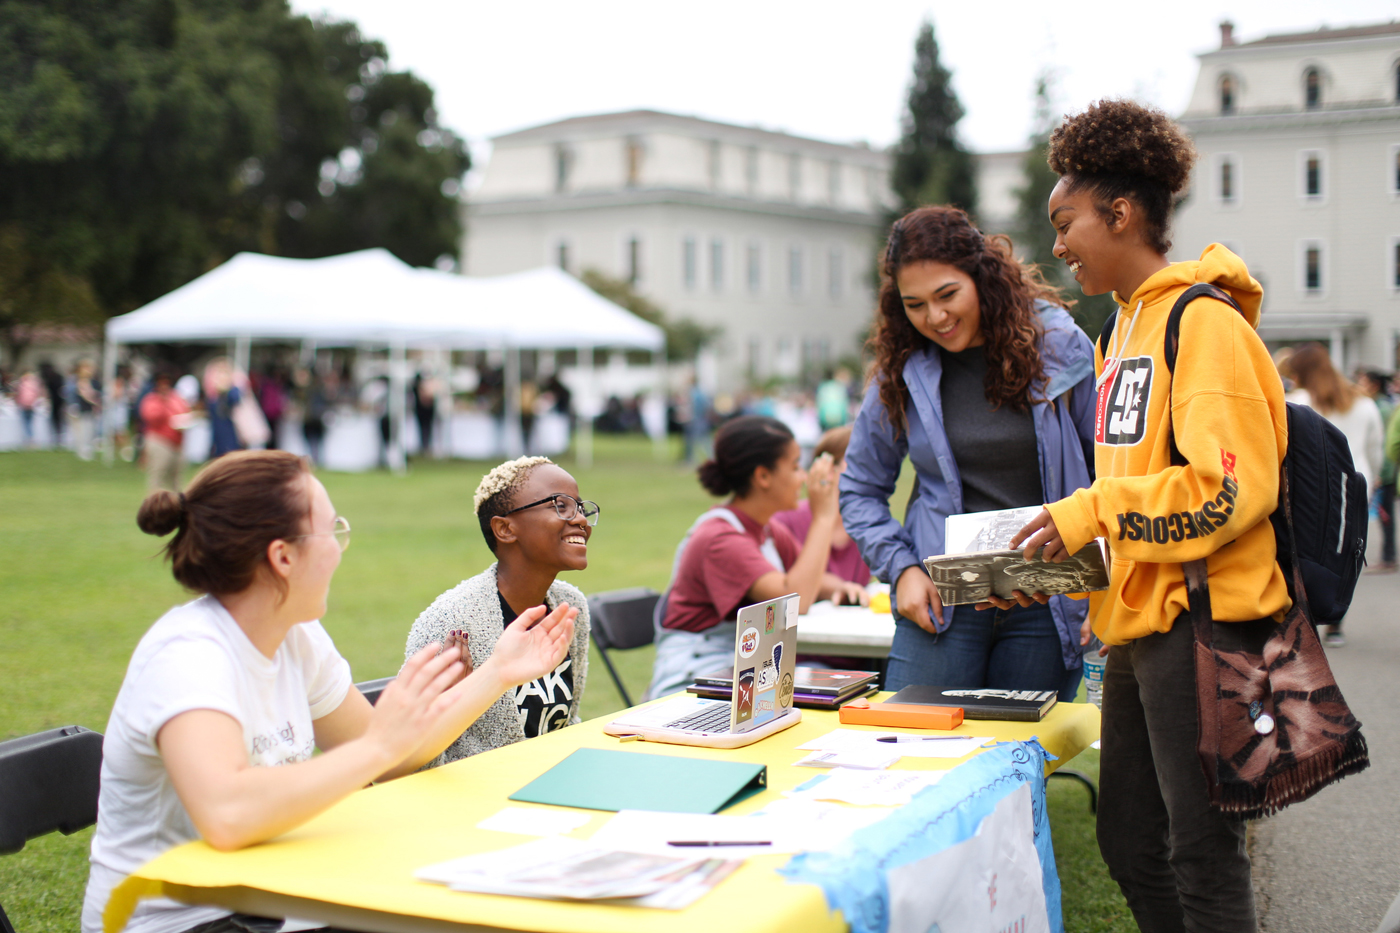 Mills College students learn about opportunities for community engagement through academic programs, student-run clubs, and local organizations at the 2017 fall Community Action Fair, held on Holmgren Meadow in the center of the Mills campus in Oakland, California.